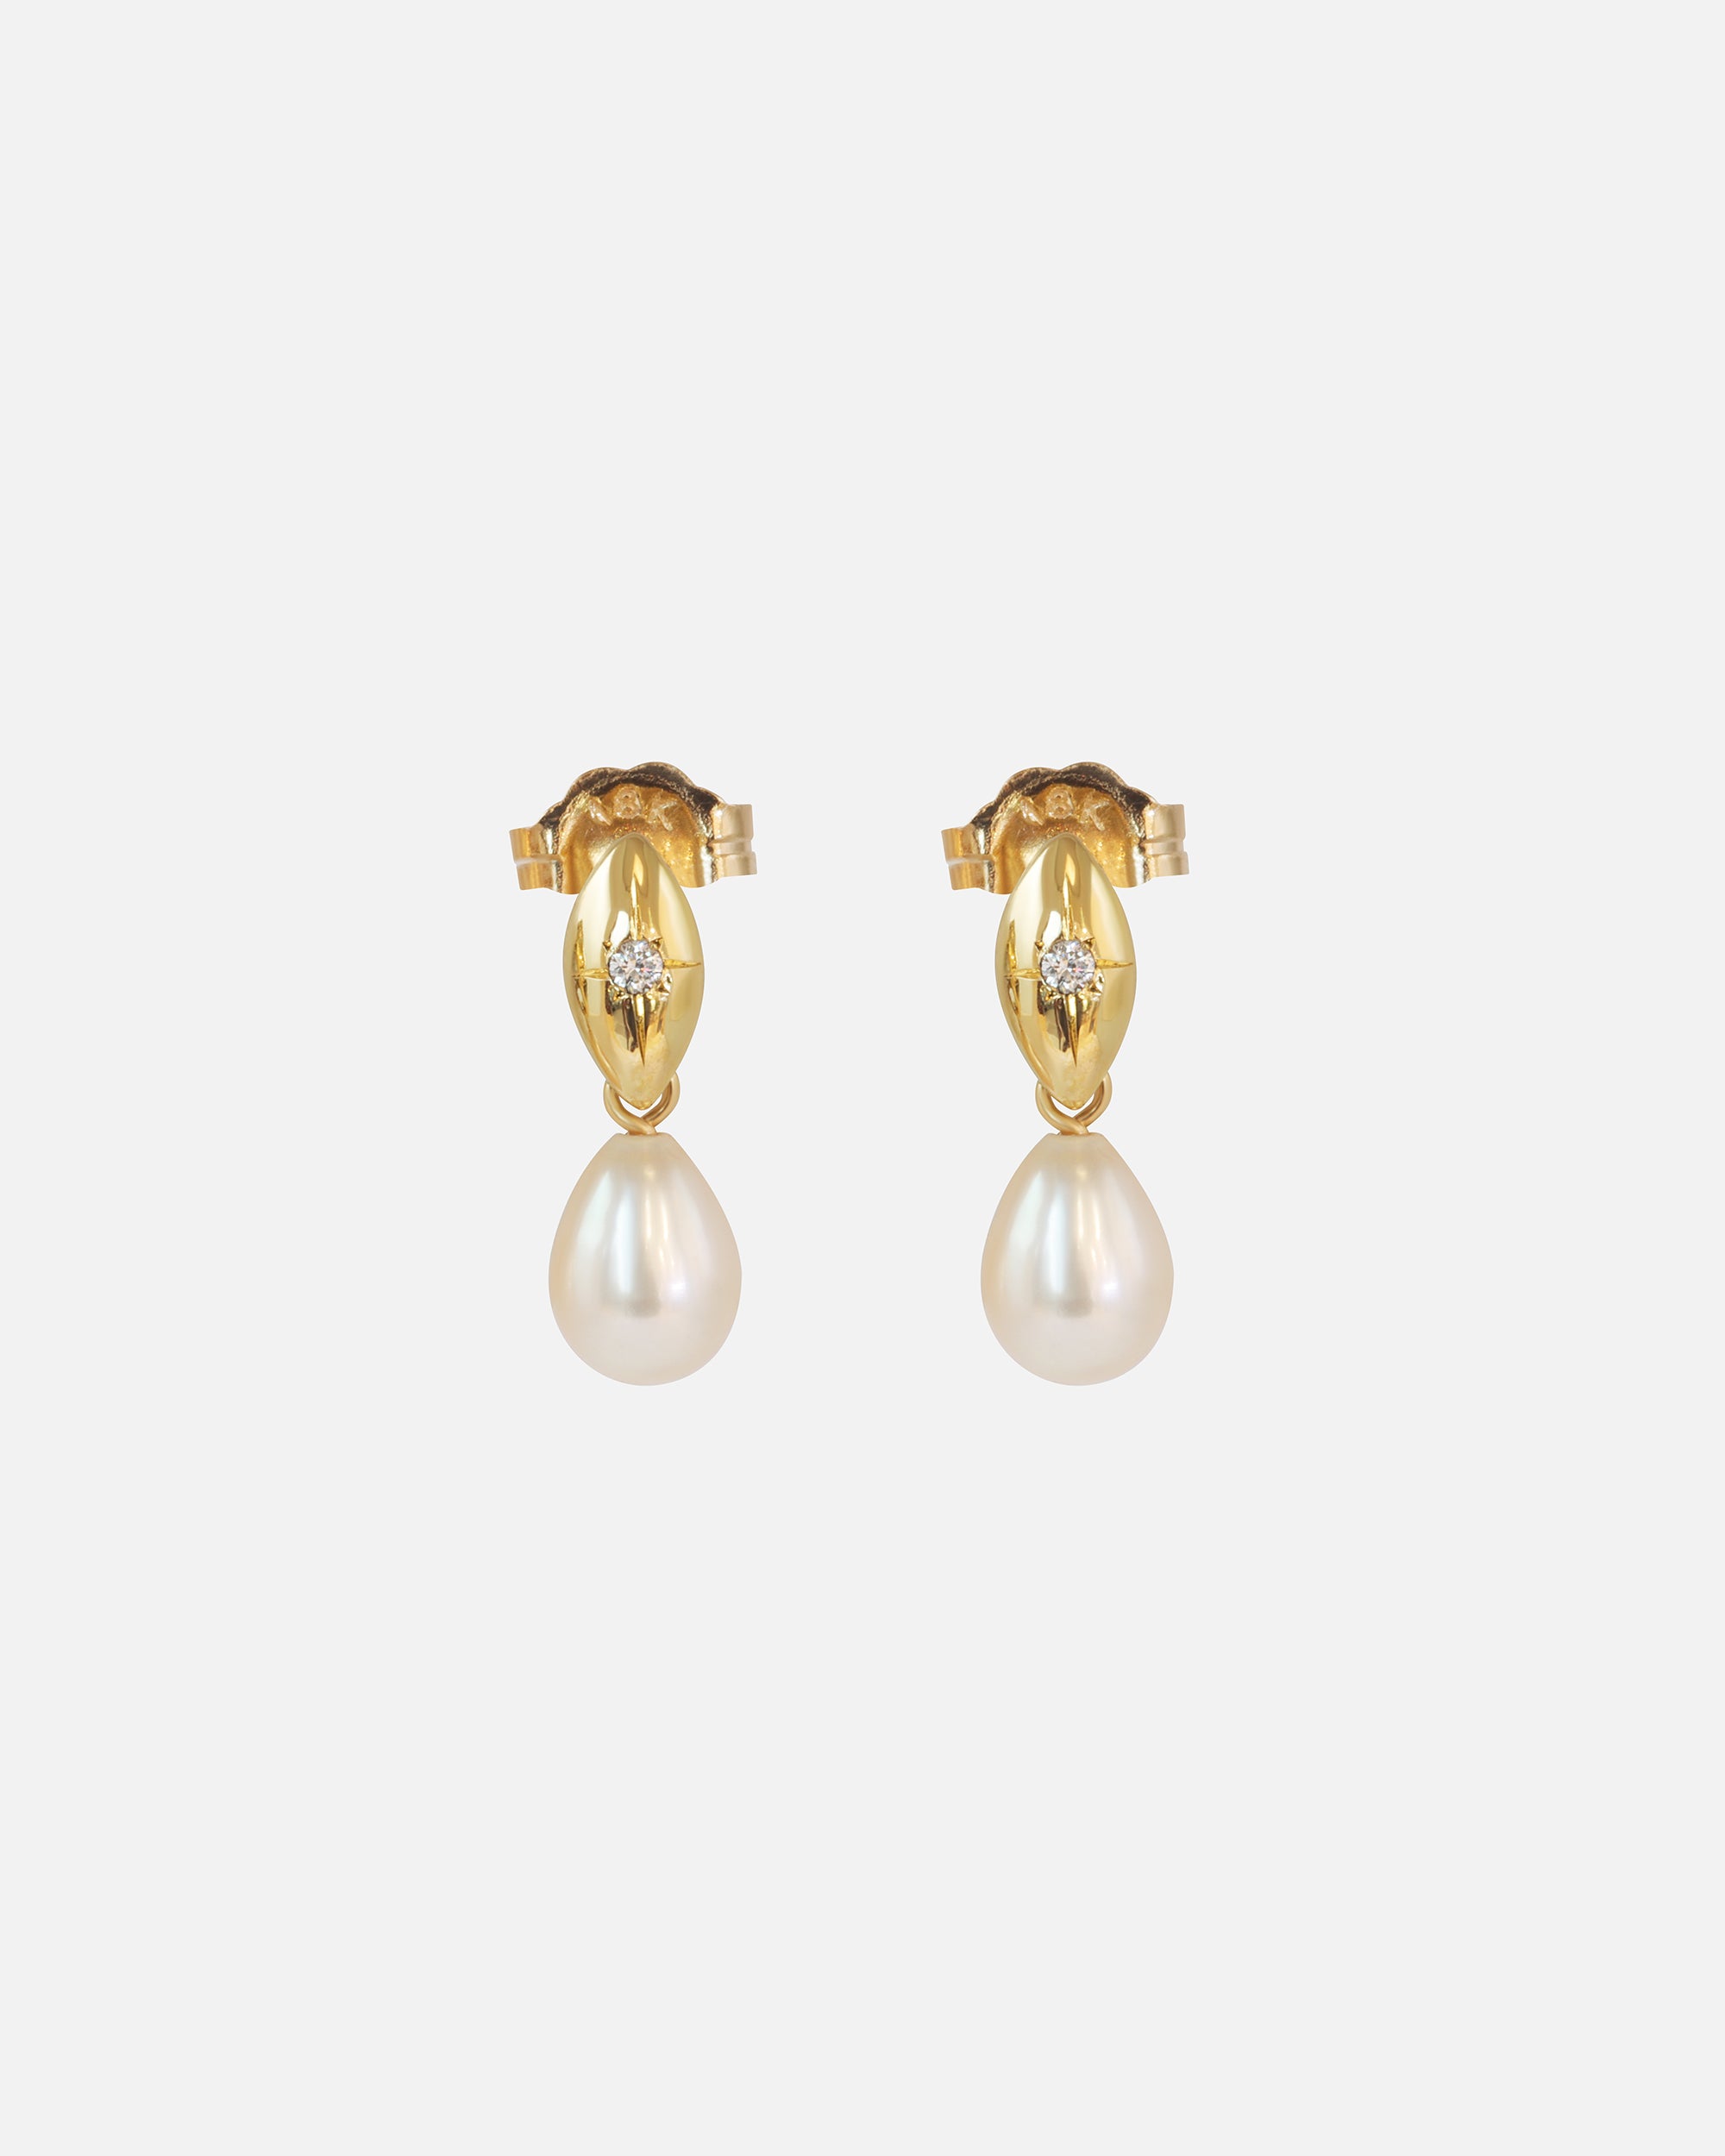 Umi / Rice Shaped with Fresh Water Pearl Earrings By Hiroyo